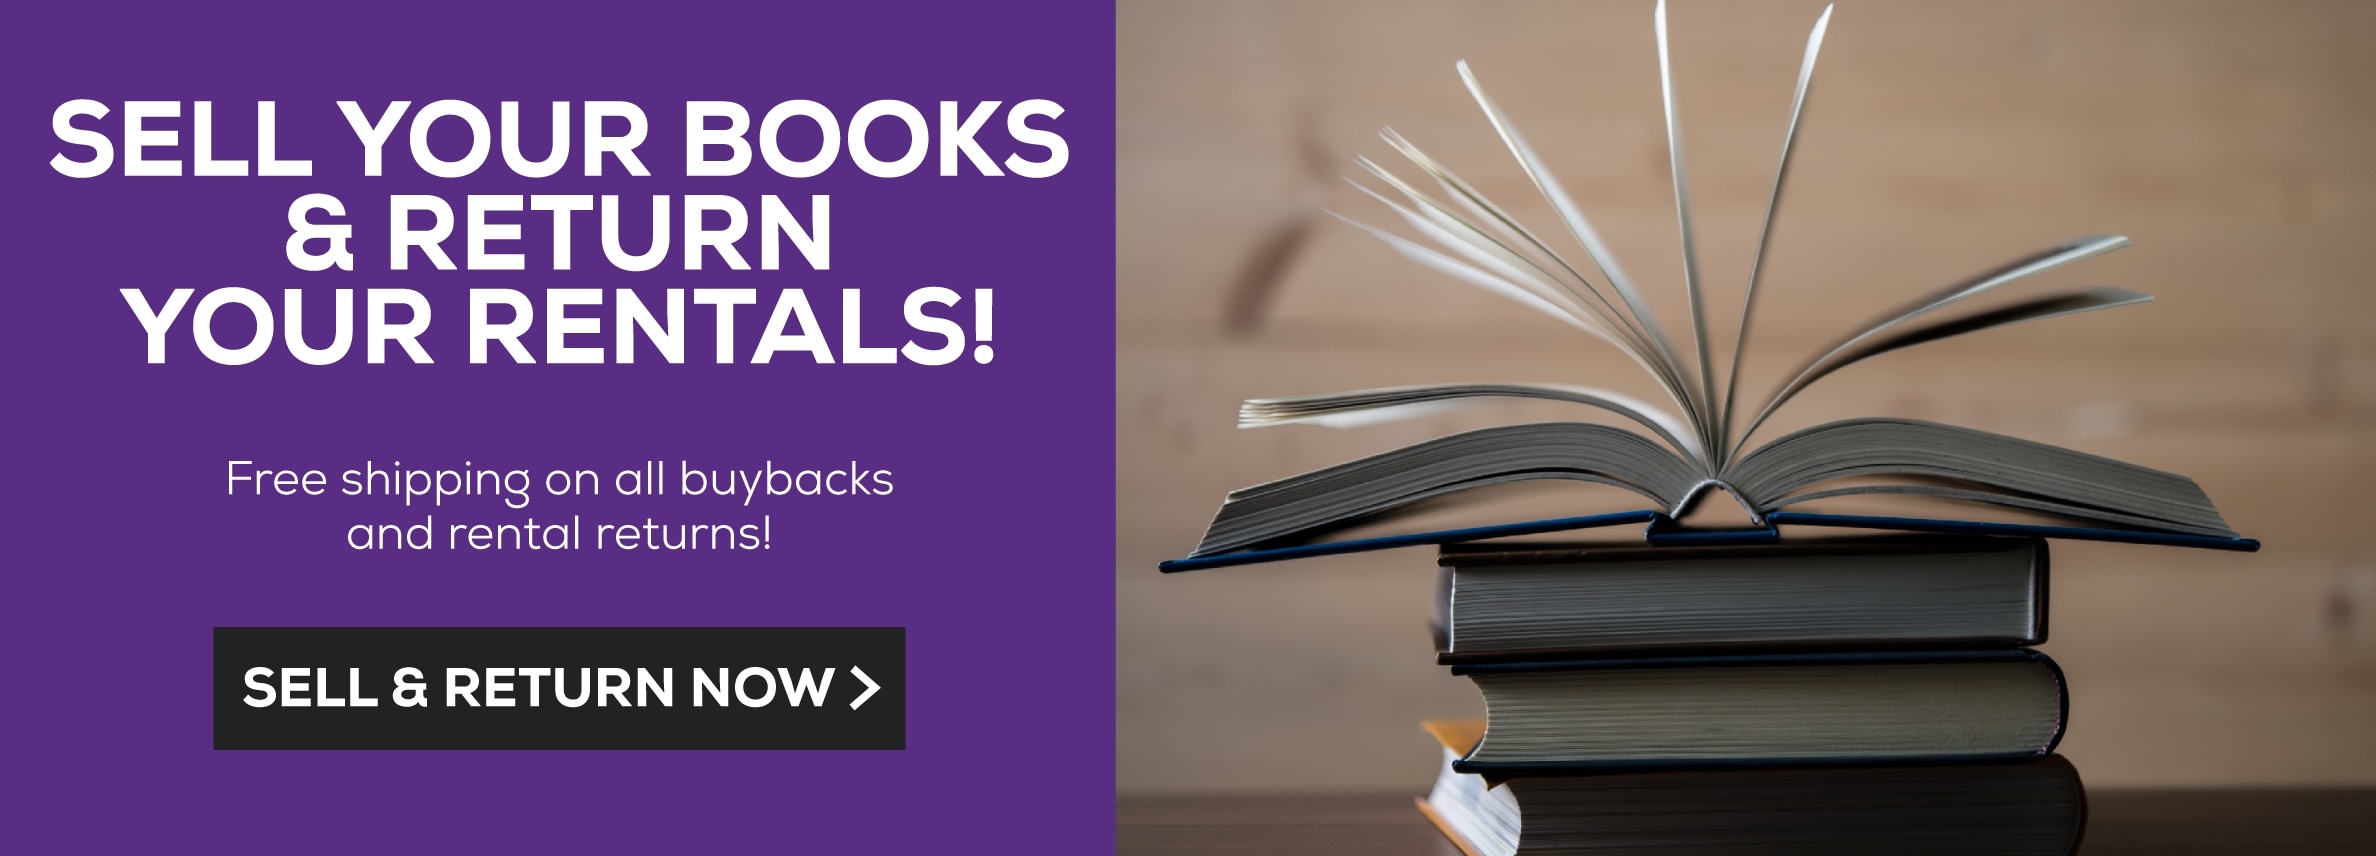 Sell your books and return your rentals. Free shipping on all buybacks and rental returns. Sell and return now.